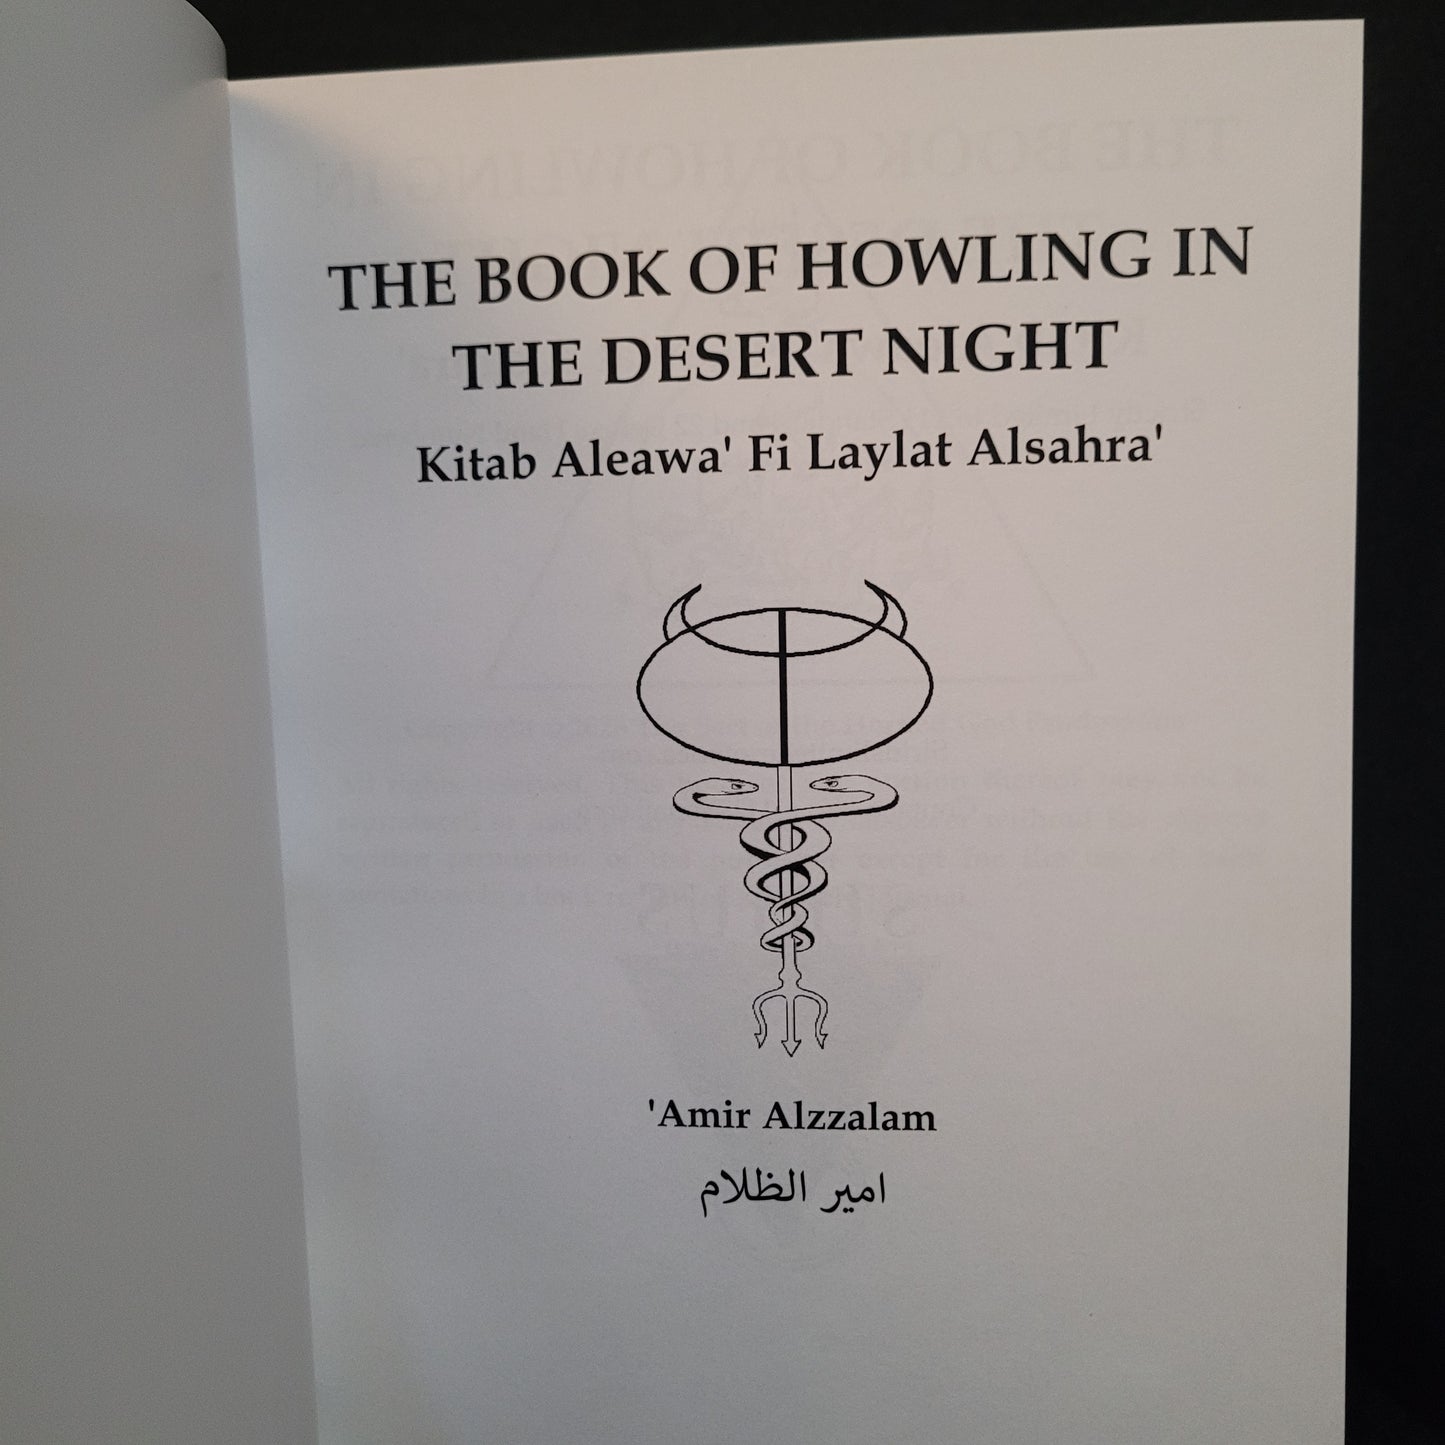 KITAB ALEAWA´FI LAYLAT ALSAHRA “The Book of Howling in the Desert Night”by 'Amir Alzzalam (Sirius Limited Esoterica, 2023) Deluxe Edition Edition Limited to 22 Copies